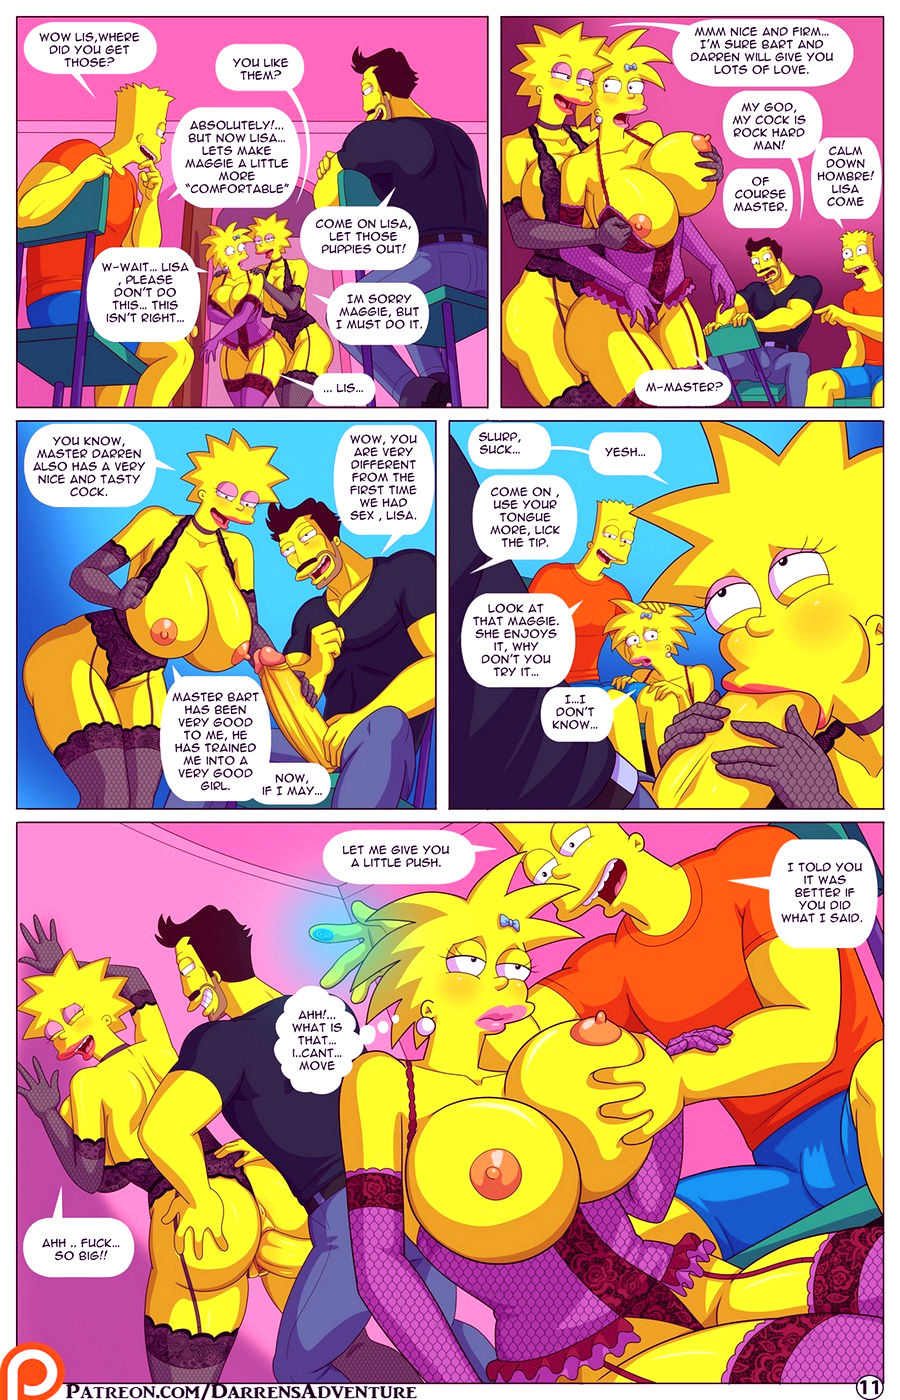 Darrens adventure or welcome to springfield porn comic picture 84